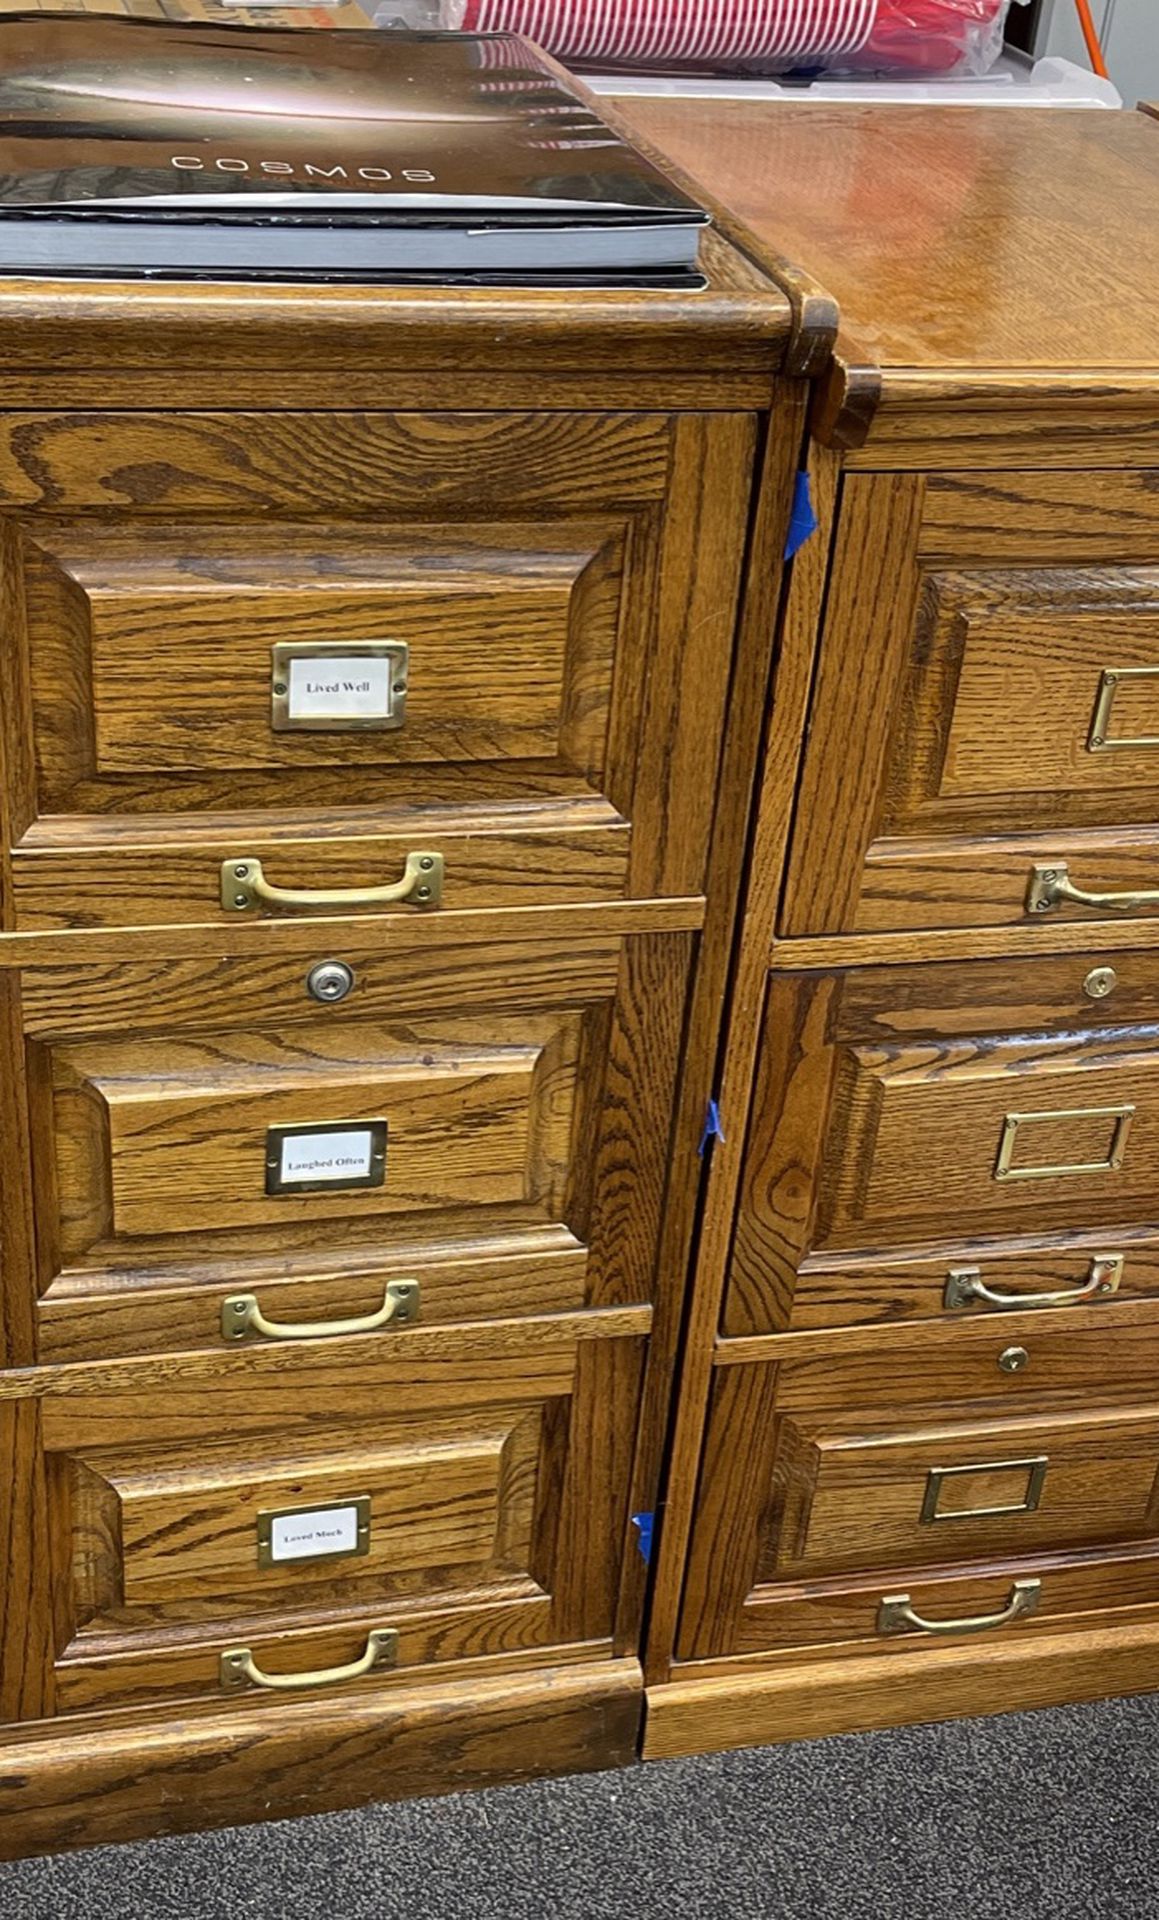 Solid Oak Vertical File Cabinets With Locks - $5 Each